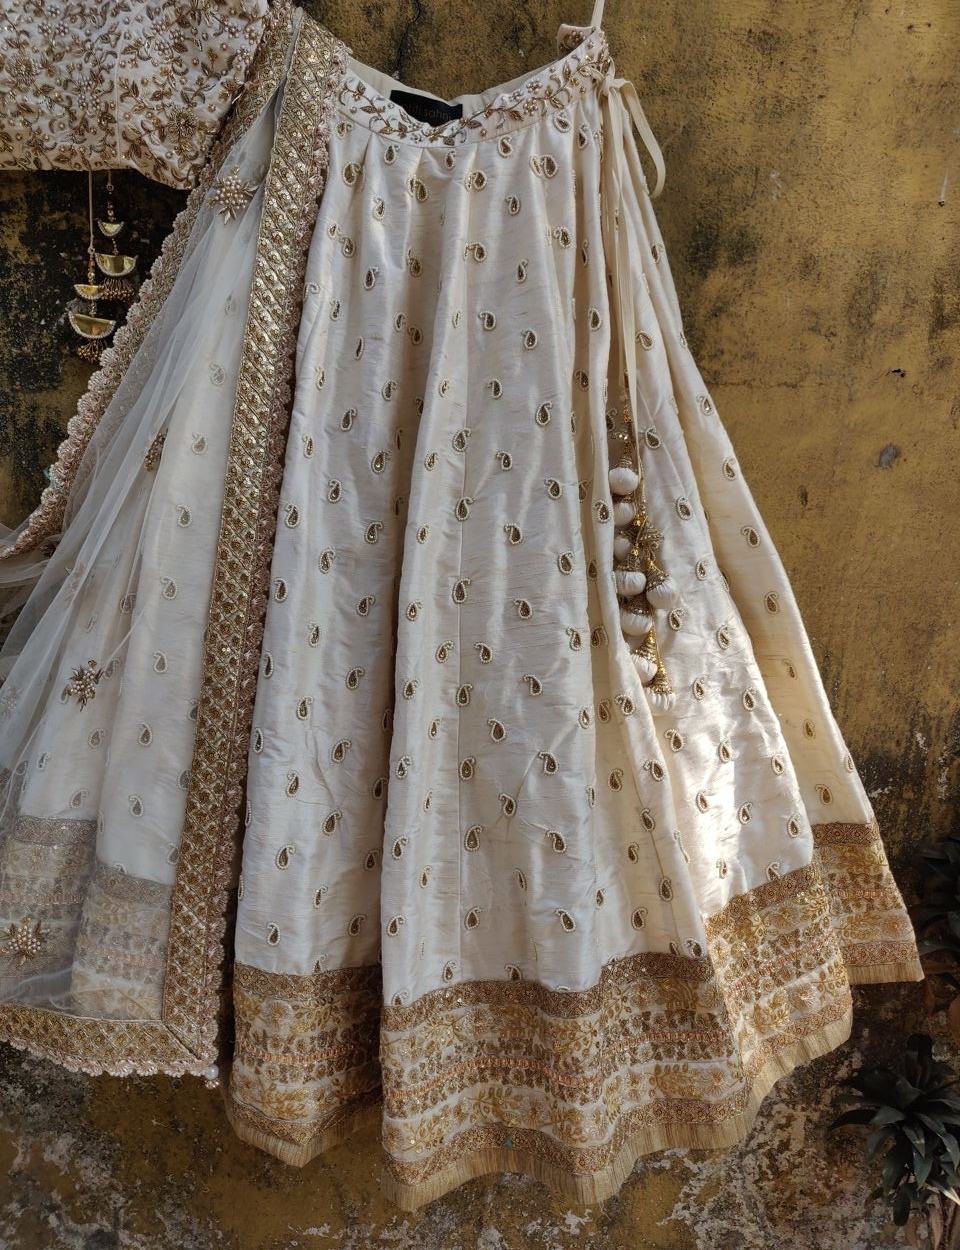 8 Accessories for Lehenga Choli To Flaunt on Your D-Day